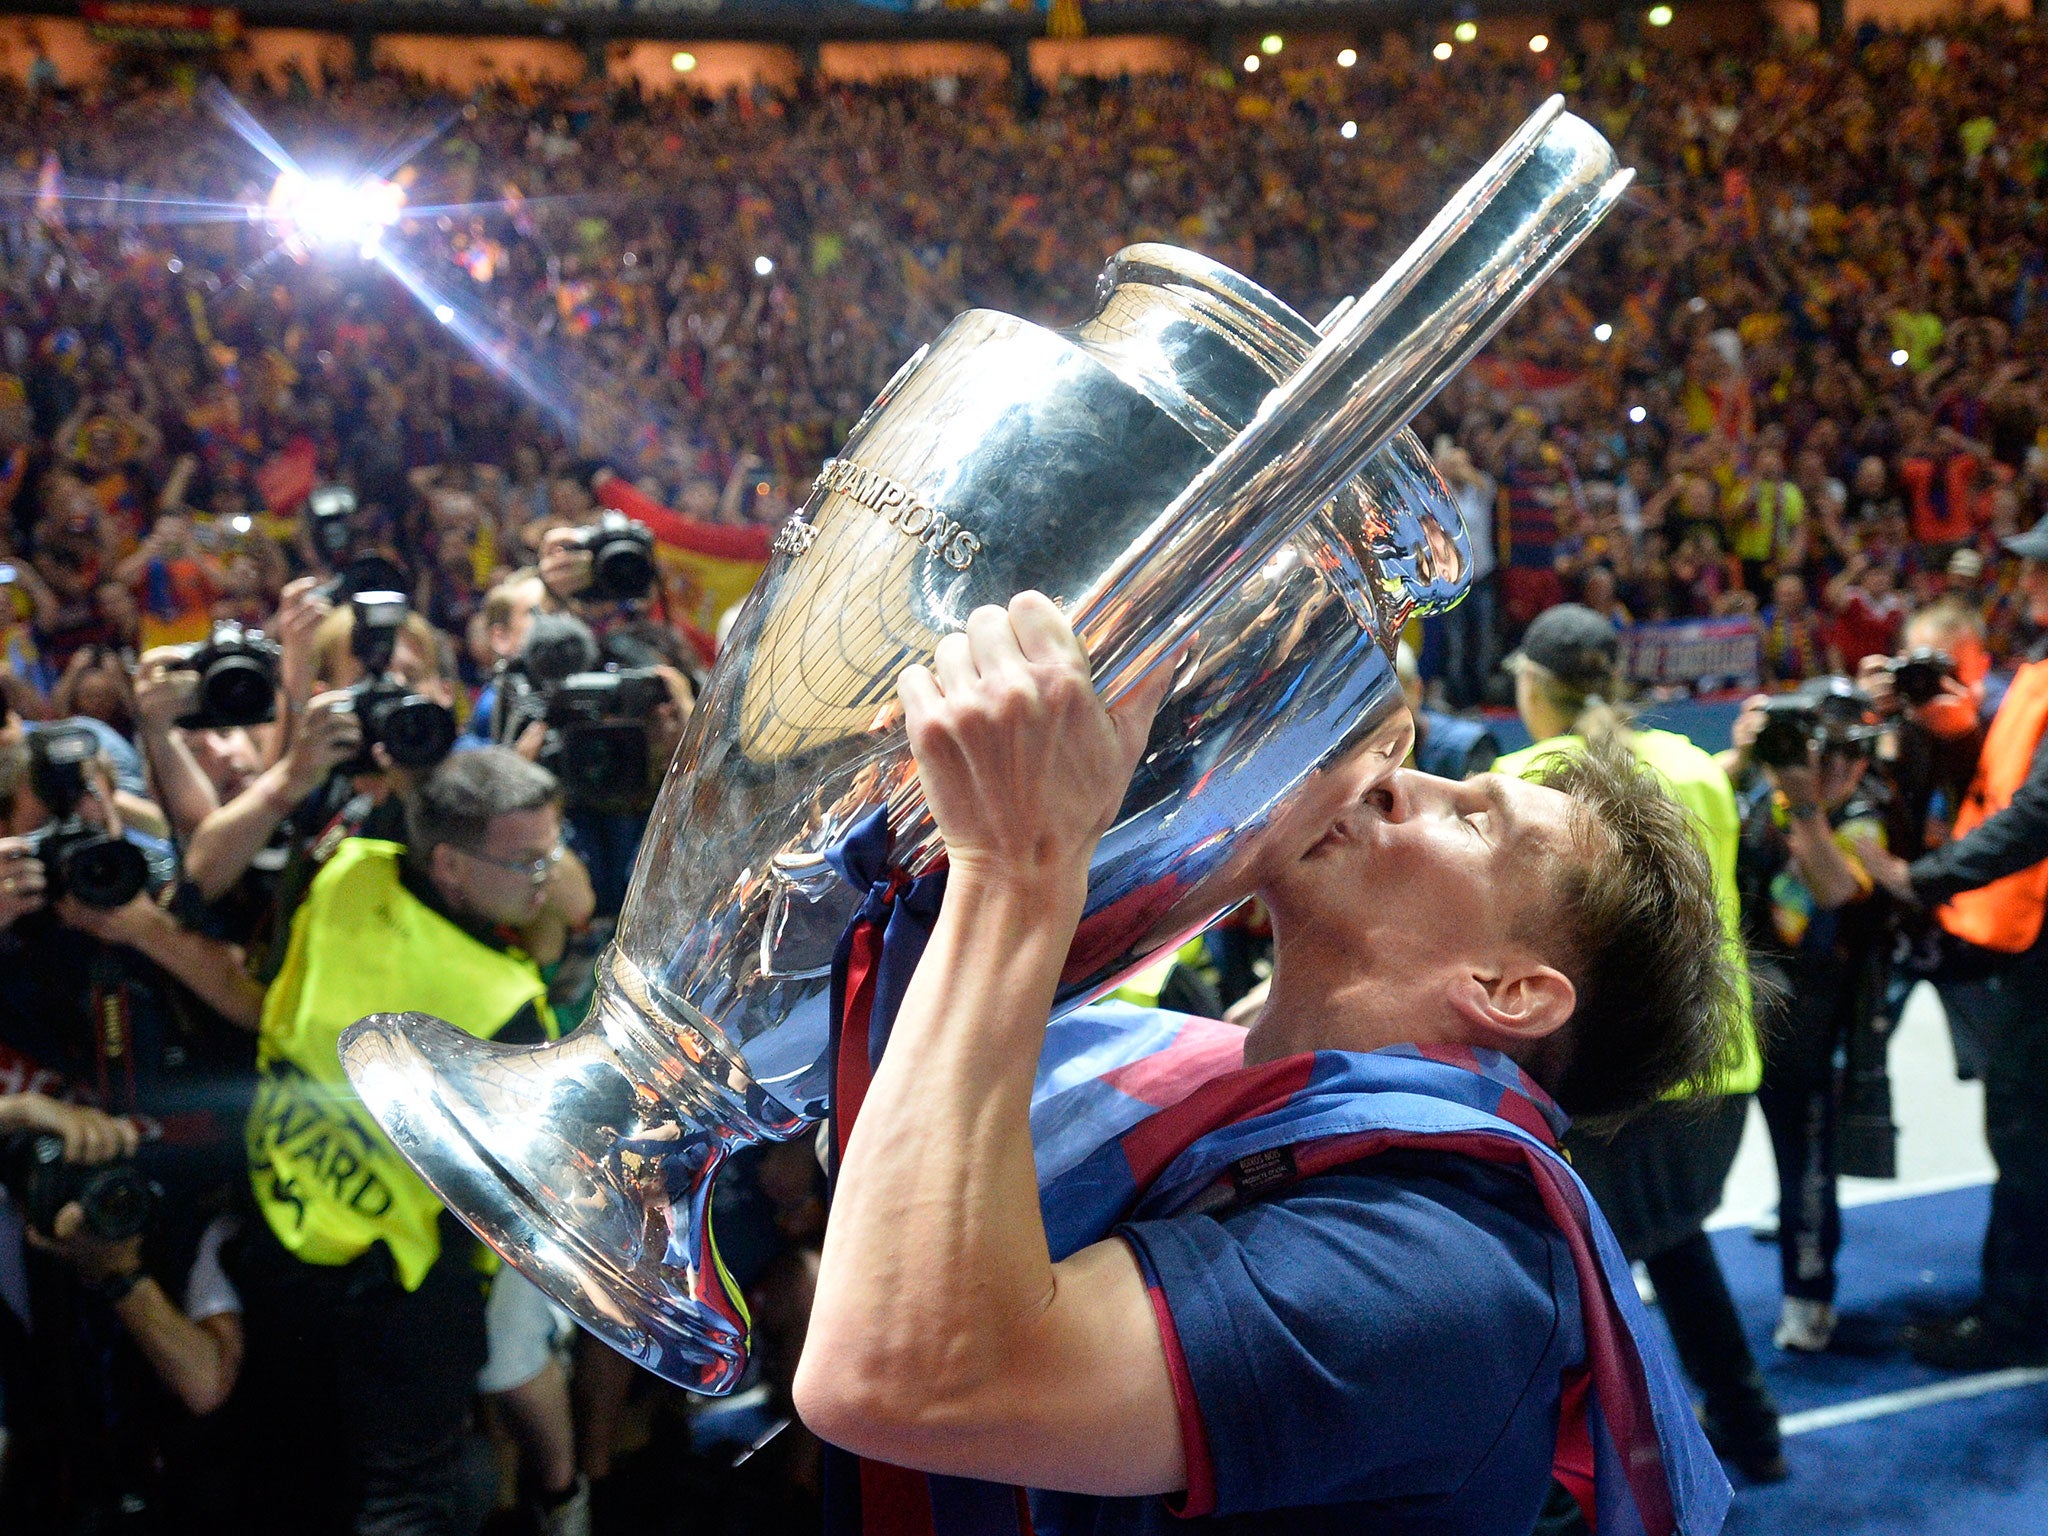 Barcelona's Lionel Messi kisses the trophy after his team won 3-1 the Champions League final soccer match between Juventus Turin and FC Barcelona at the Olympic stadium in Berlin